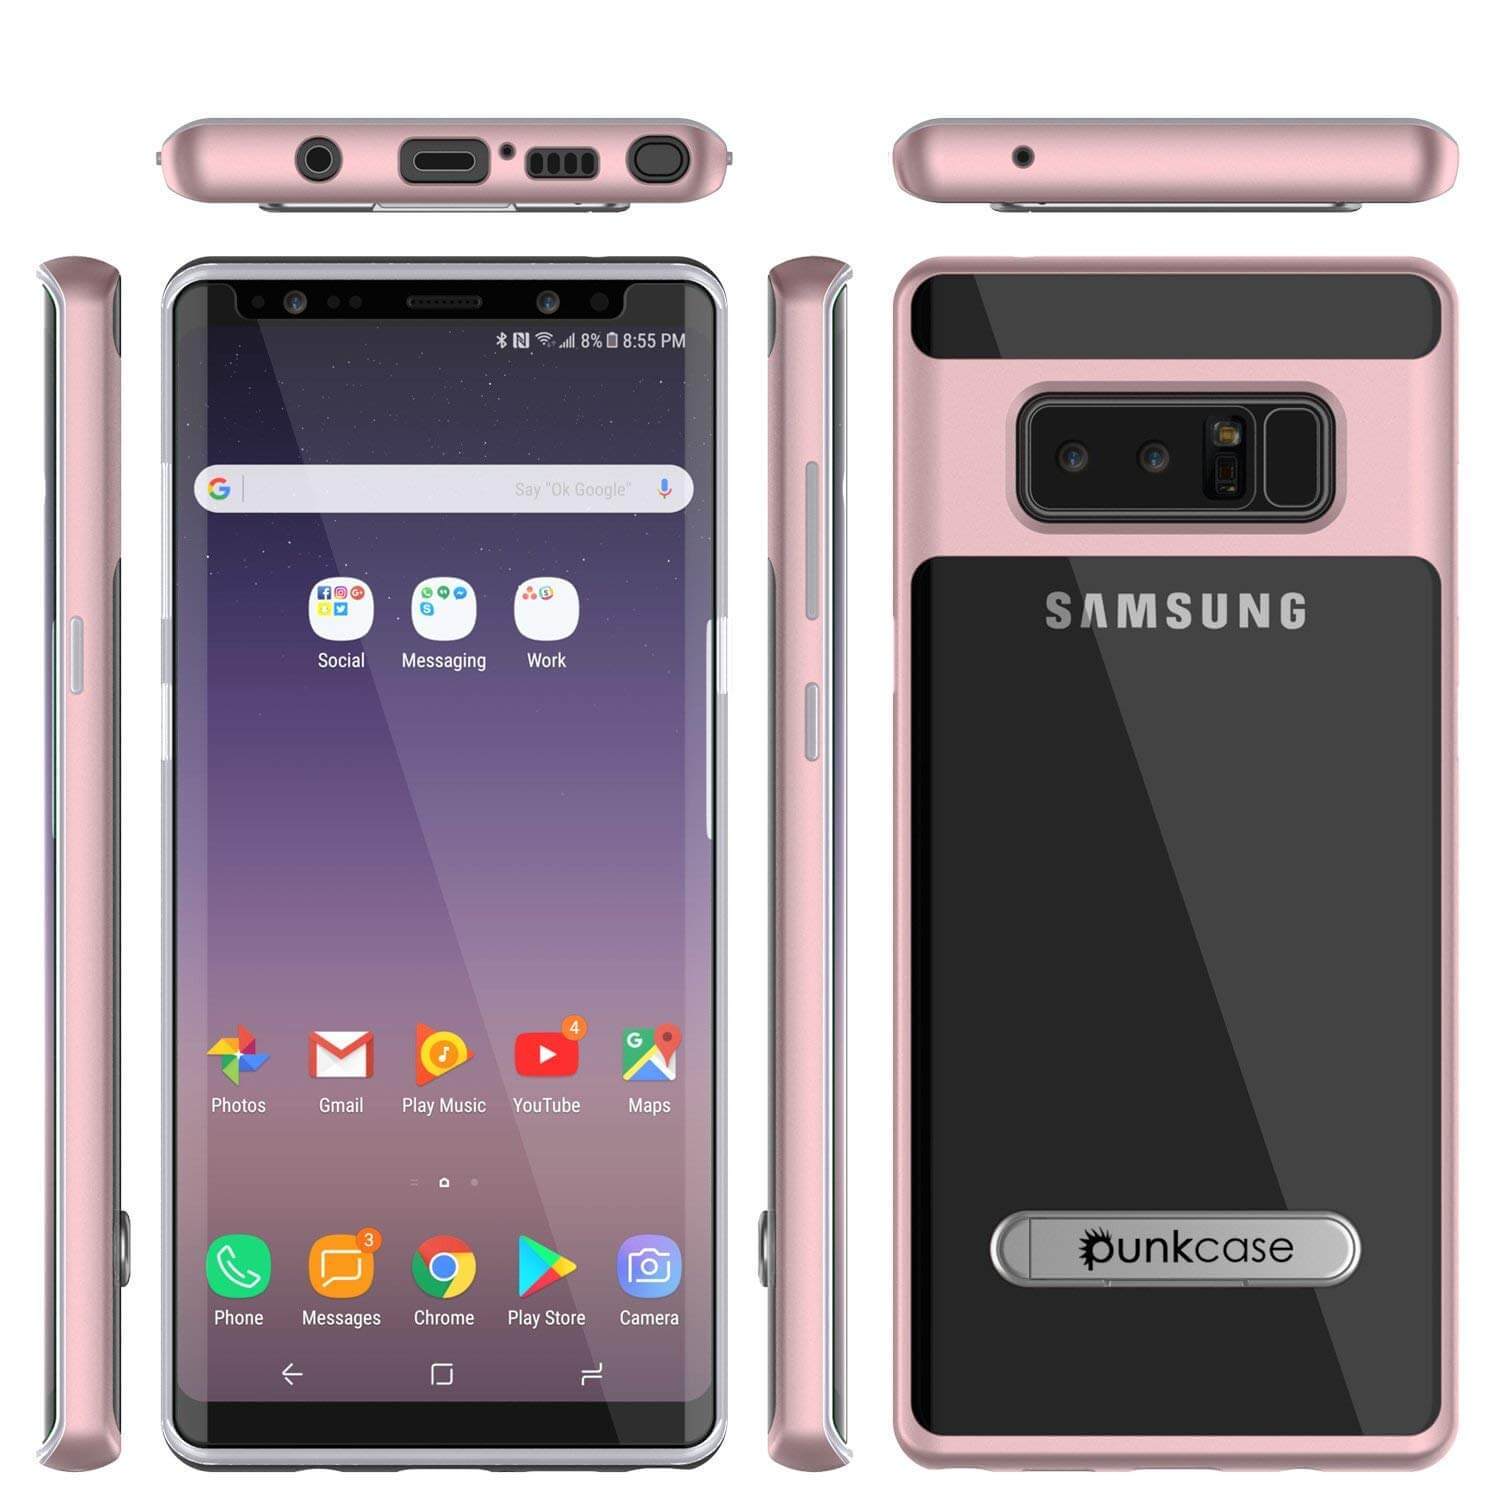 Galaxy Note 8, Punkcase [LUCID 3.0 Series] Armor Cover [ROSE GOLD]